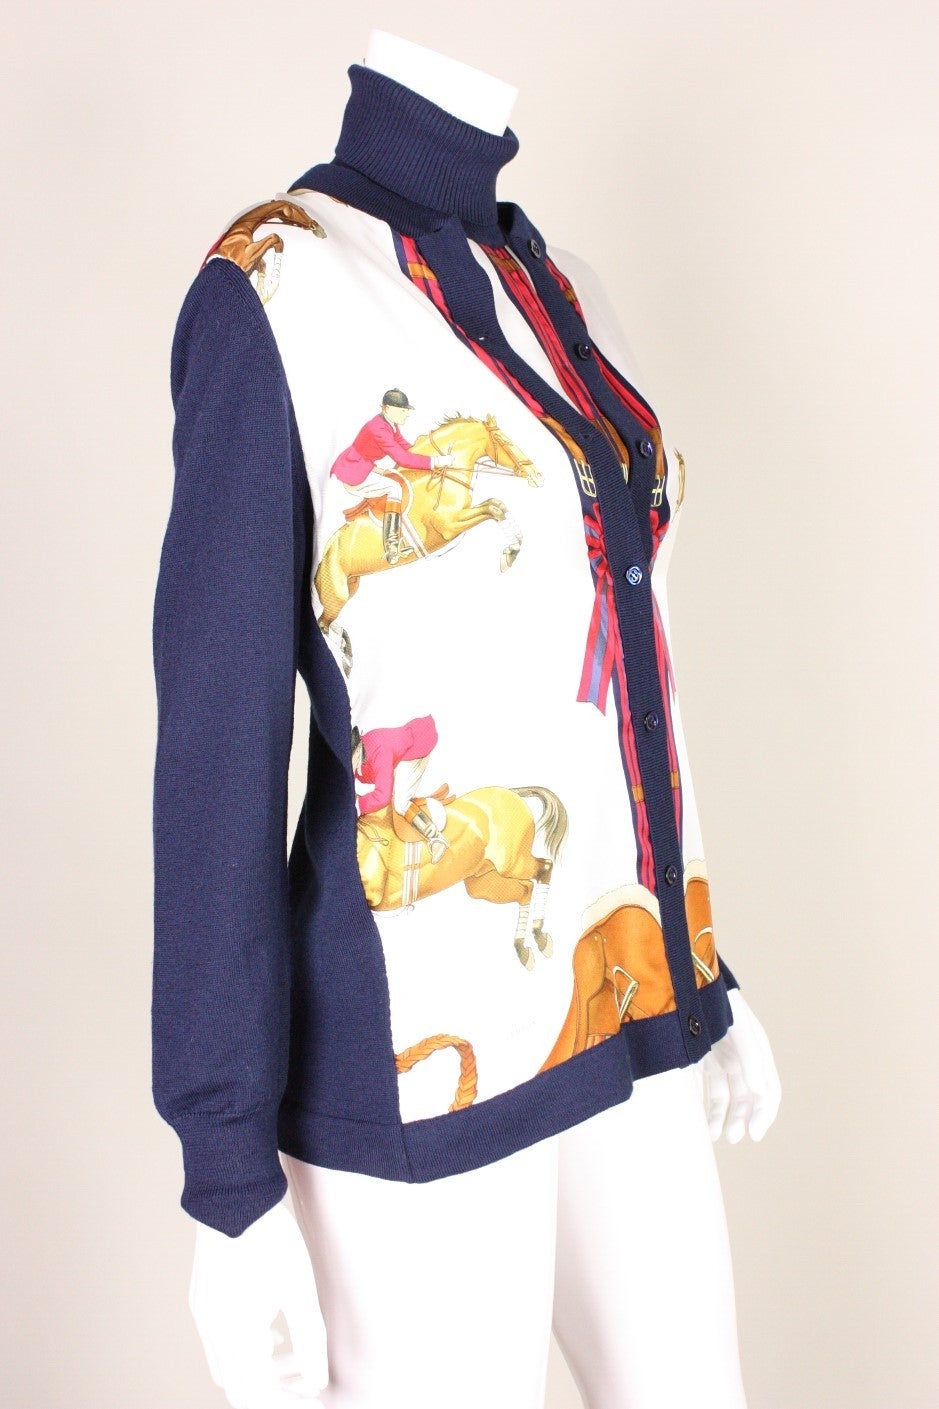 Hermes twinset is comprised of a turtleneck and cardigan.  Front is made of white silk with an equestrian print.  Backs of both pieces are made of finely woven knit wool.  Ribbed collar and cuffs.  Both items are new with tags.

Labeled size